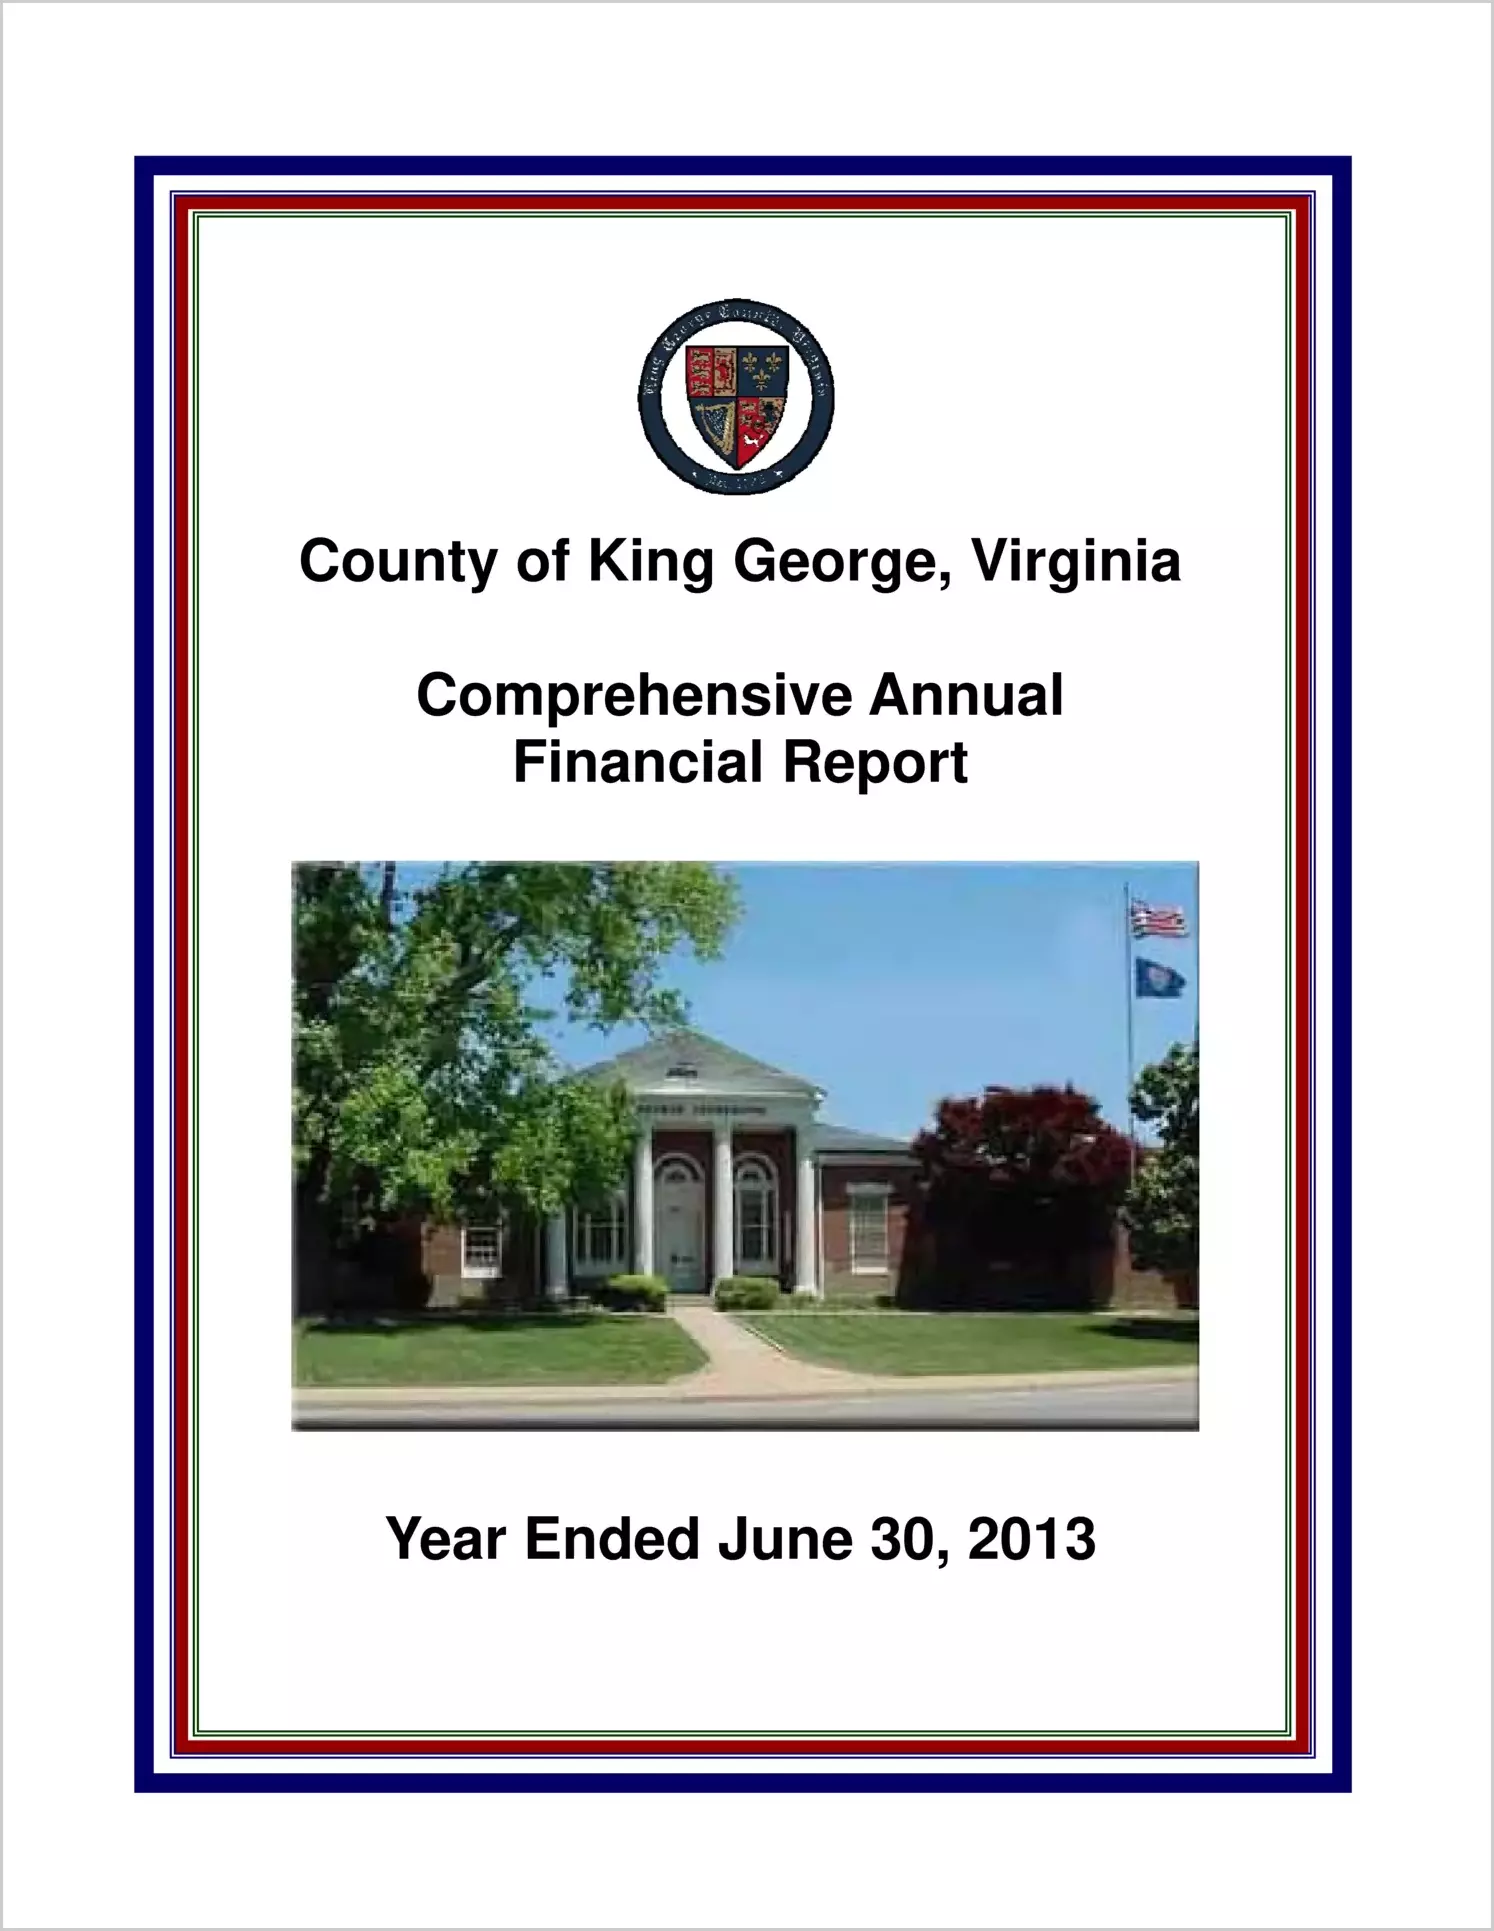 2013 Annual Financial Report for County of King George